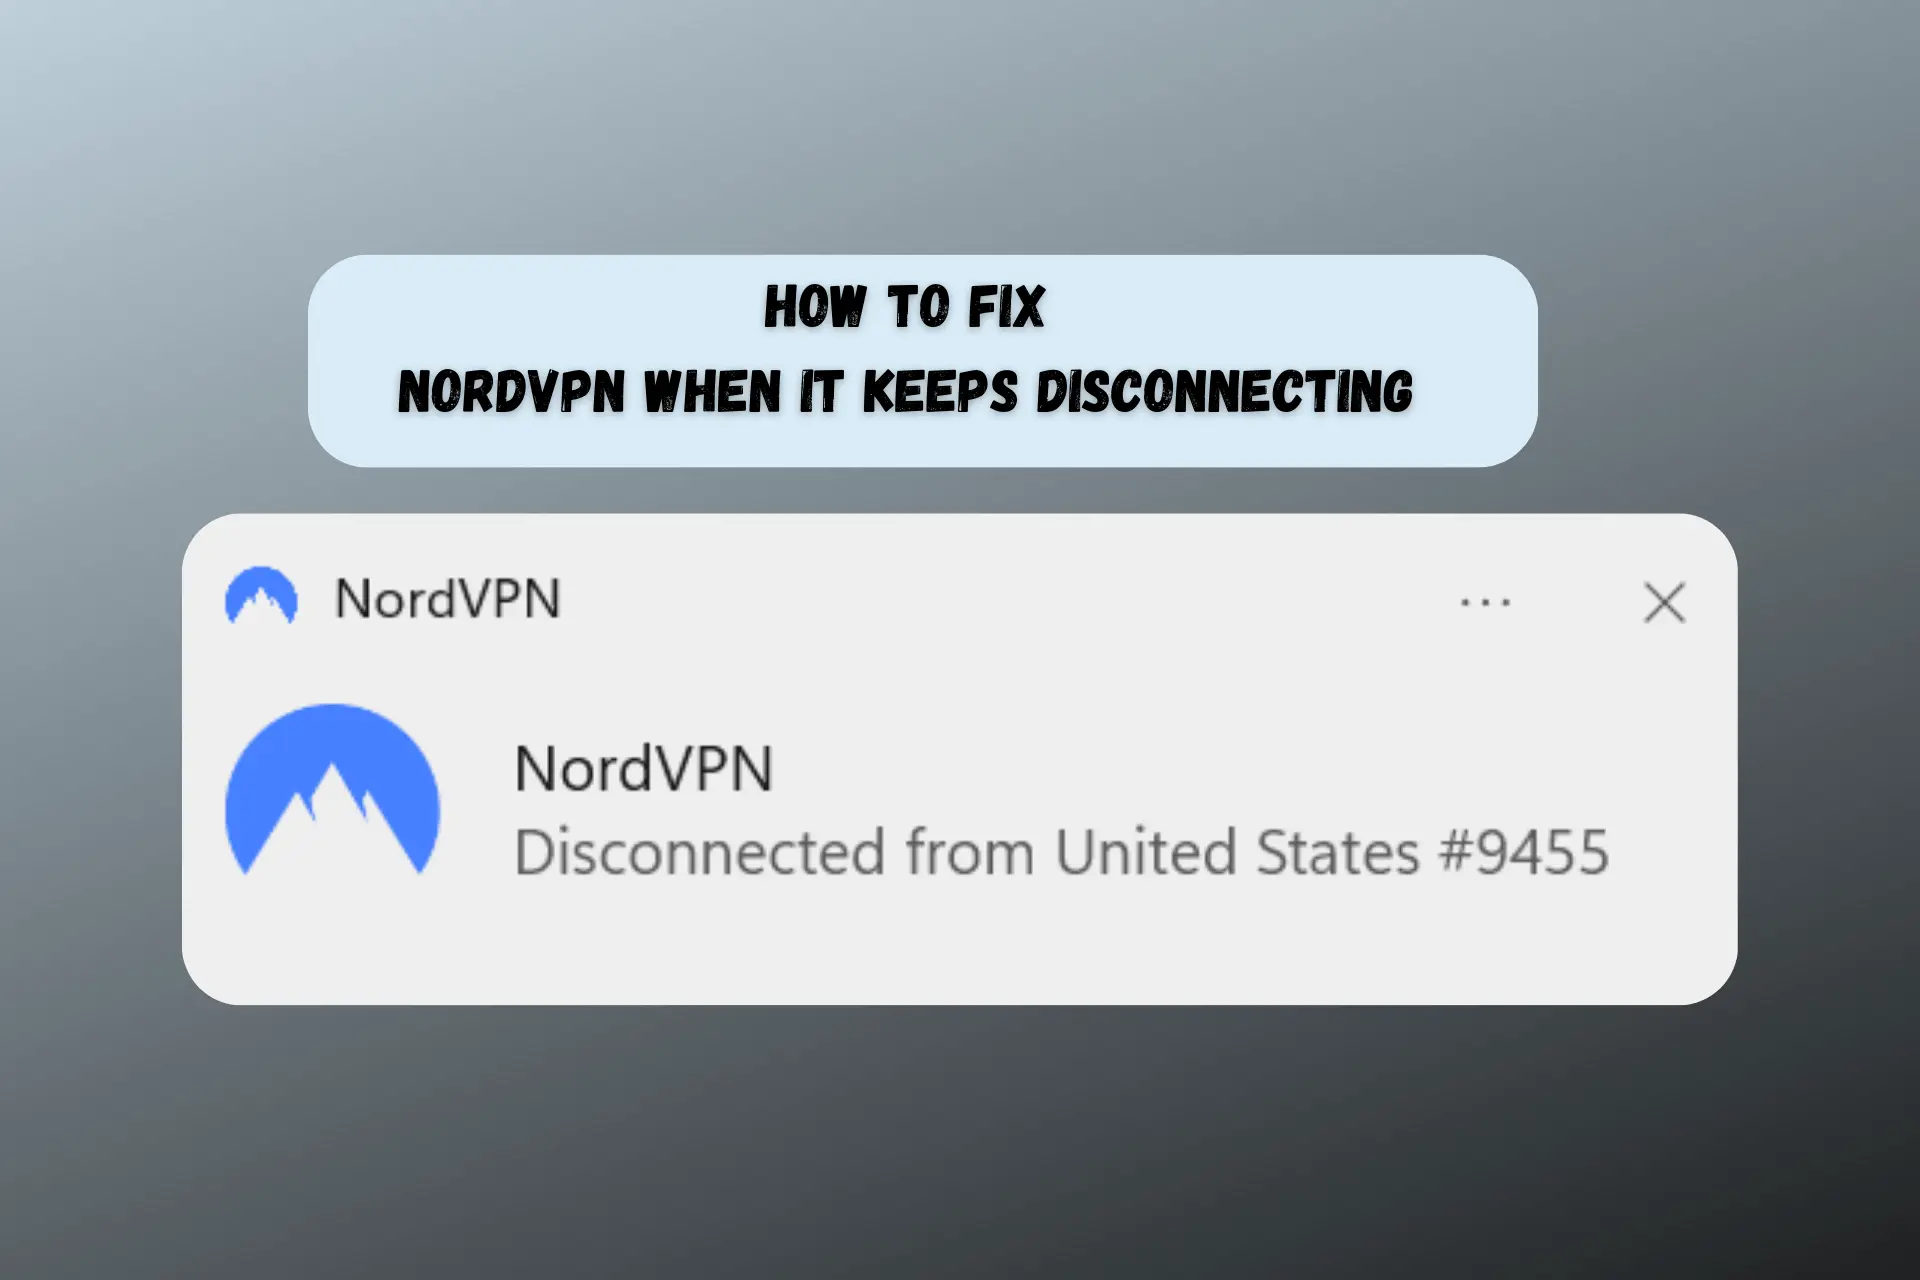 nordvpn keeps disconnecting featured image